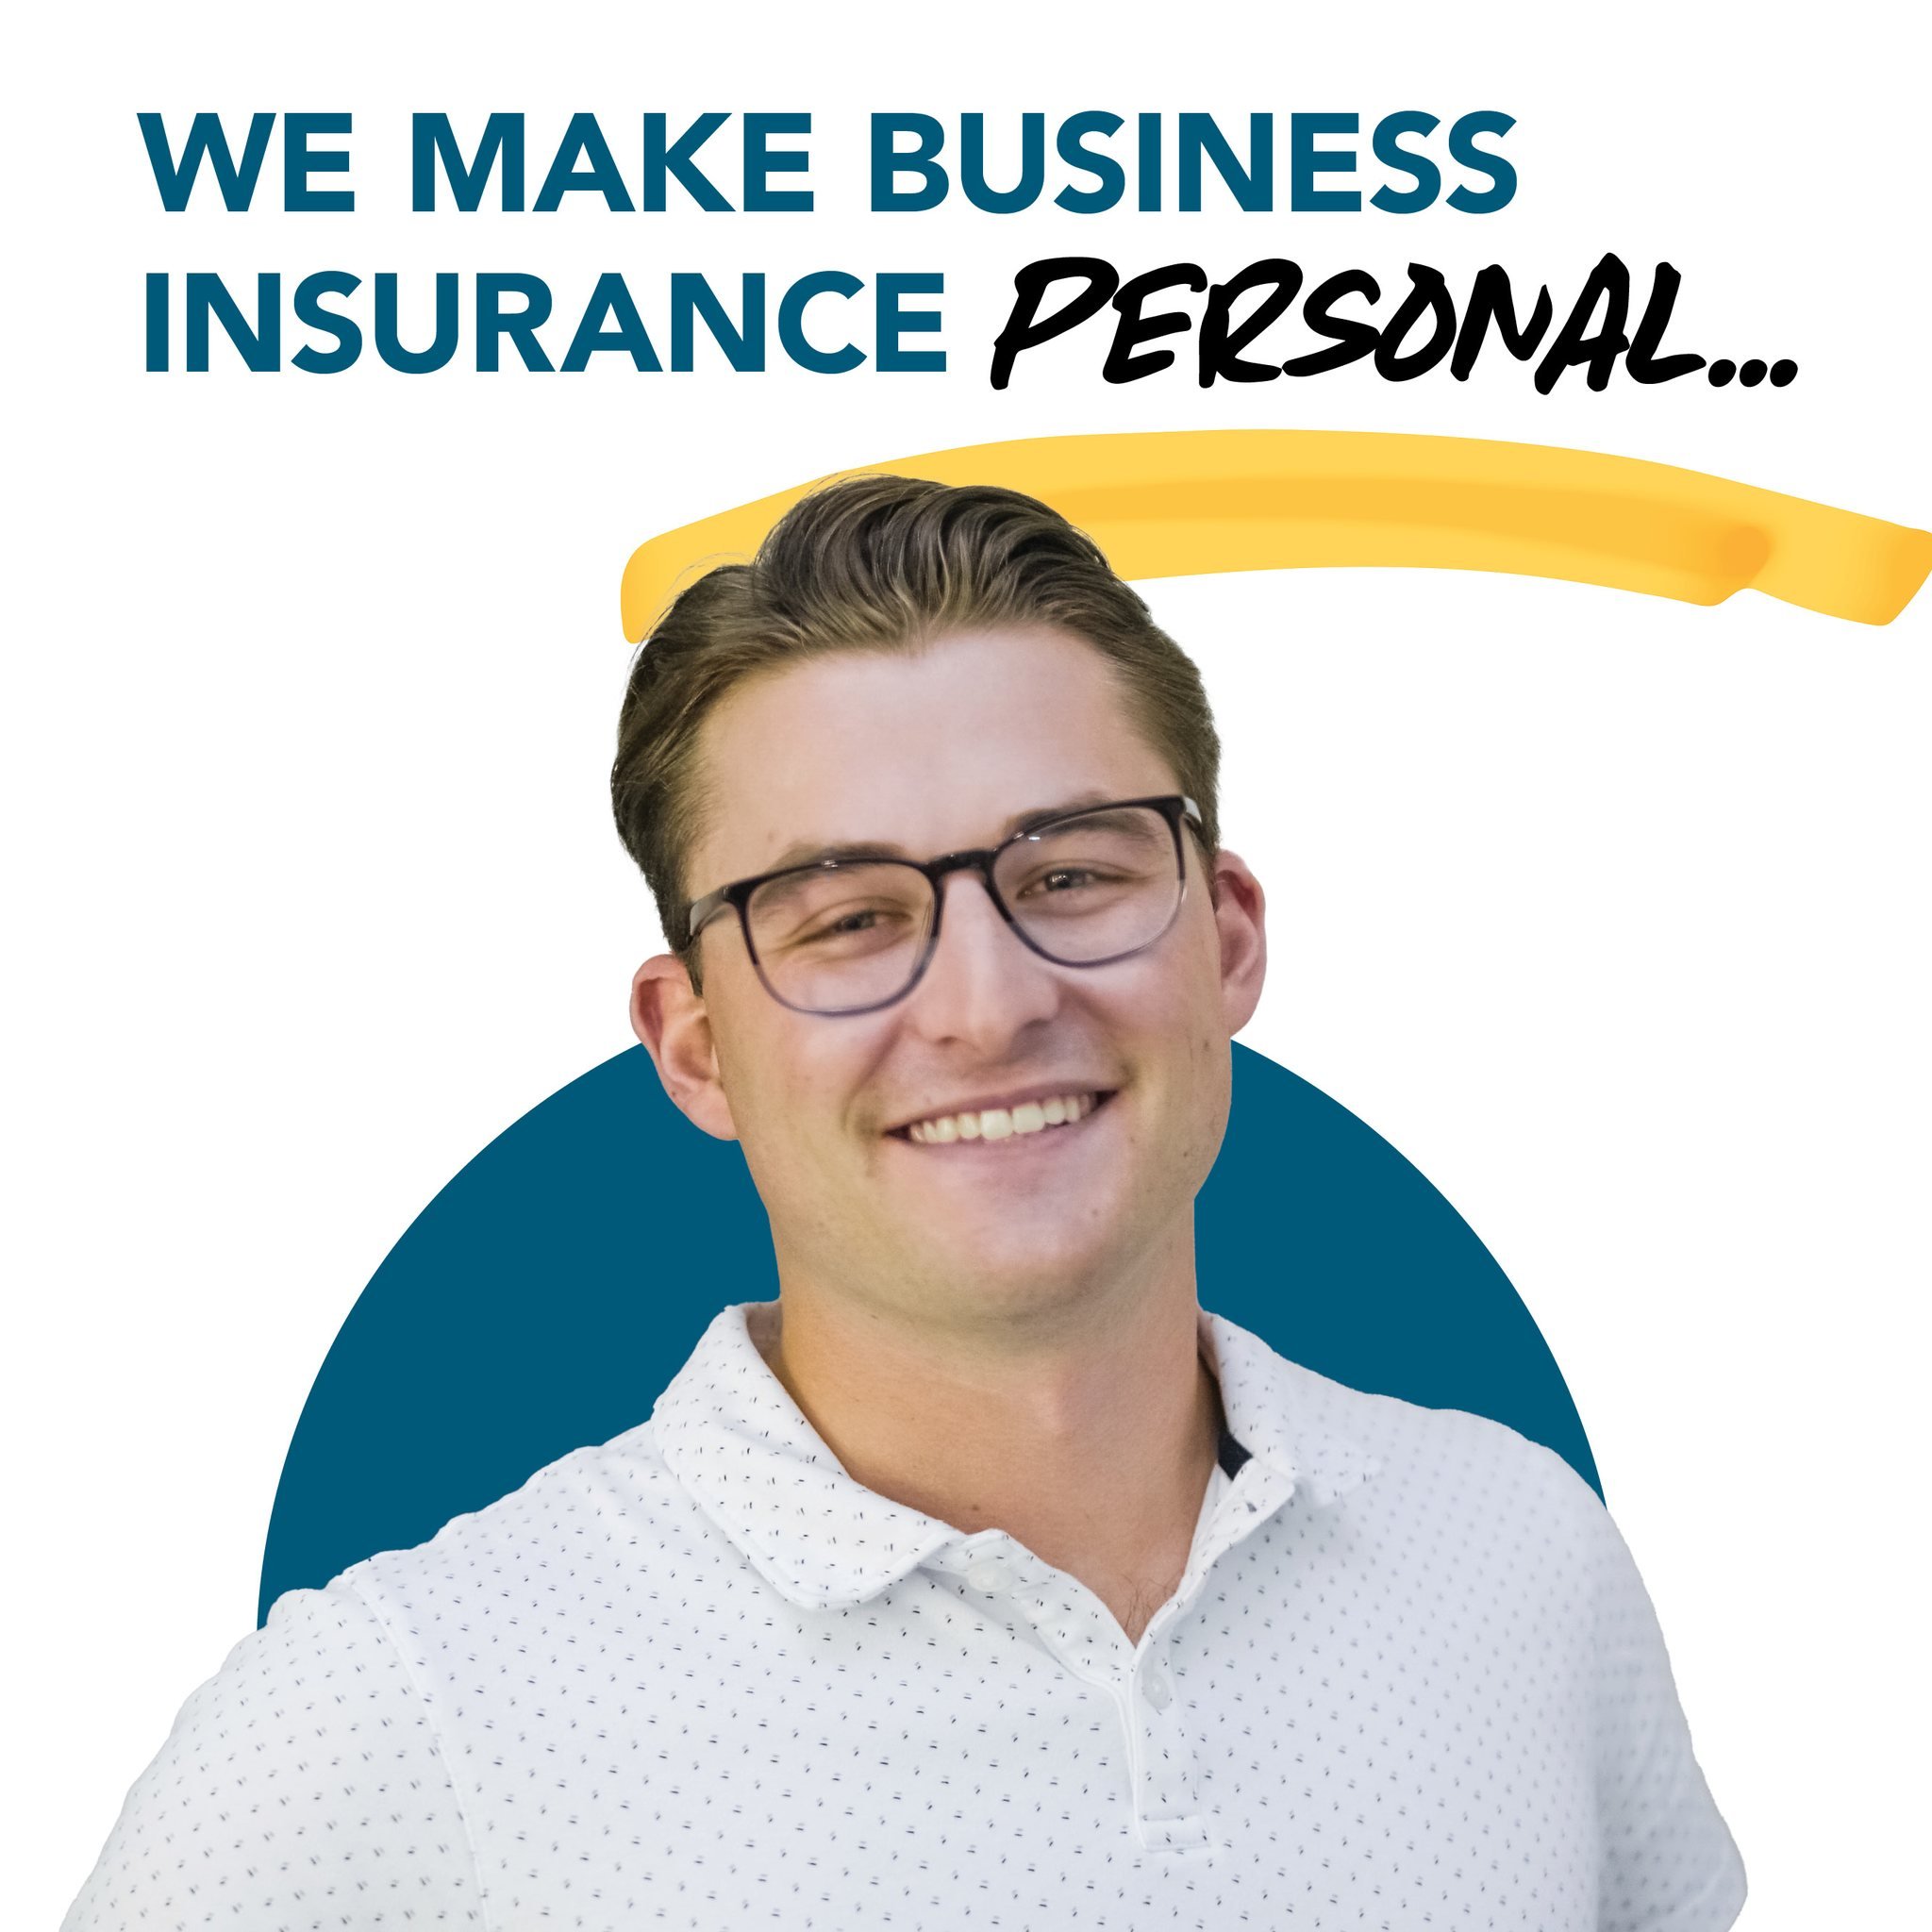 🌟 At Ford Insurance Agency, we believe in making business insurance personal! 🌟

Running a business isn't just about numbers and policies&mdash;it's about people, passion, and dedication. That's why we go beyond the traditional approach to insuranc